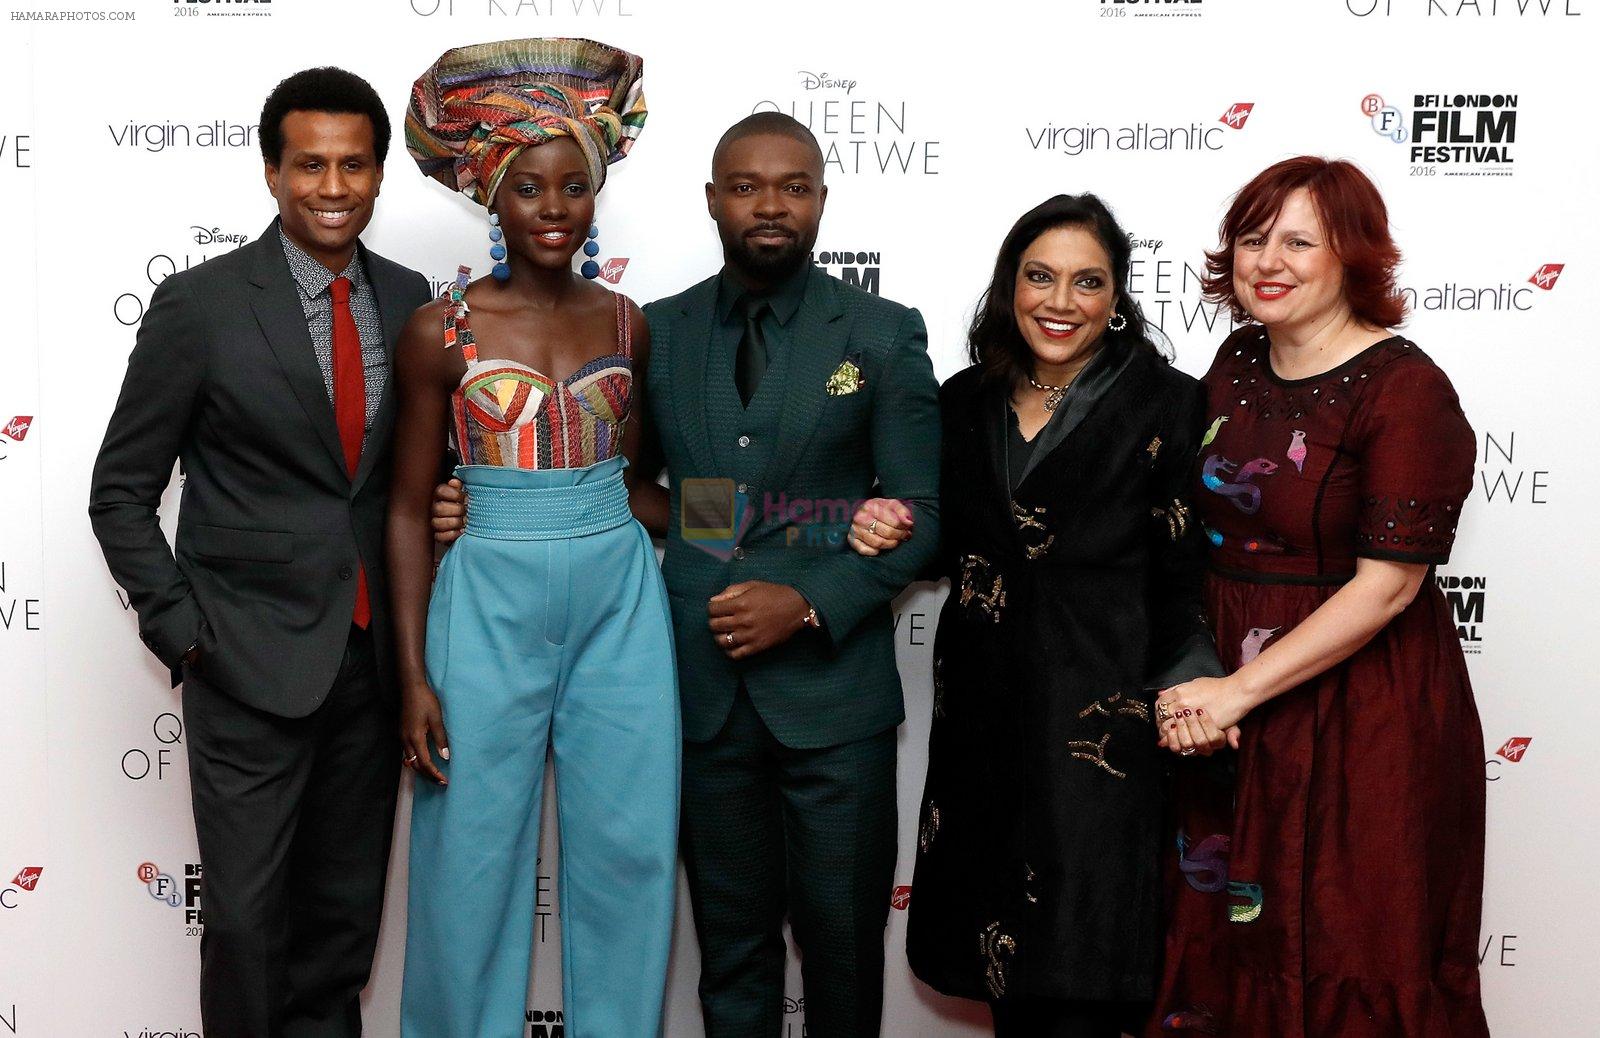 Mira Nair's Queen of Katwe premiere in BFI London Film Festival on 10th Oct 2016